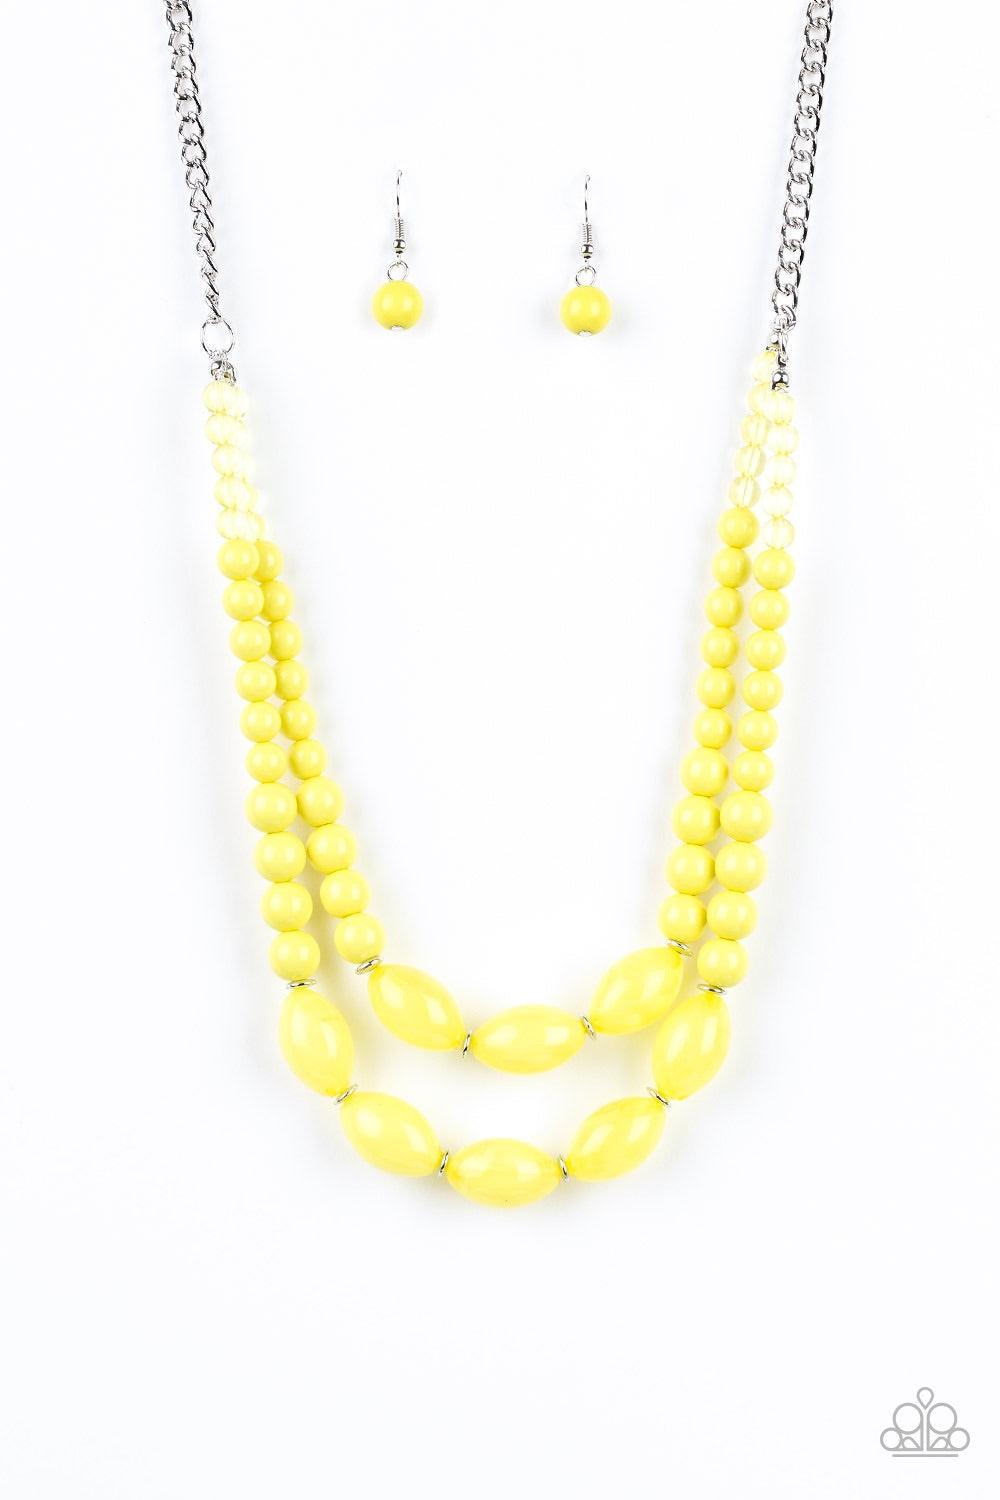 Paparazzi Accessories Sundae Shoppe - Yellow A collection of glassy, polished, and cloudy yellow beads are threaded along two invisible wires below the collar for a beautiful pop of color. Features an adjustable clasp closure. Jewelry